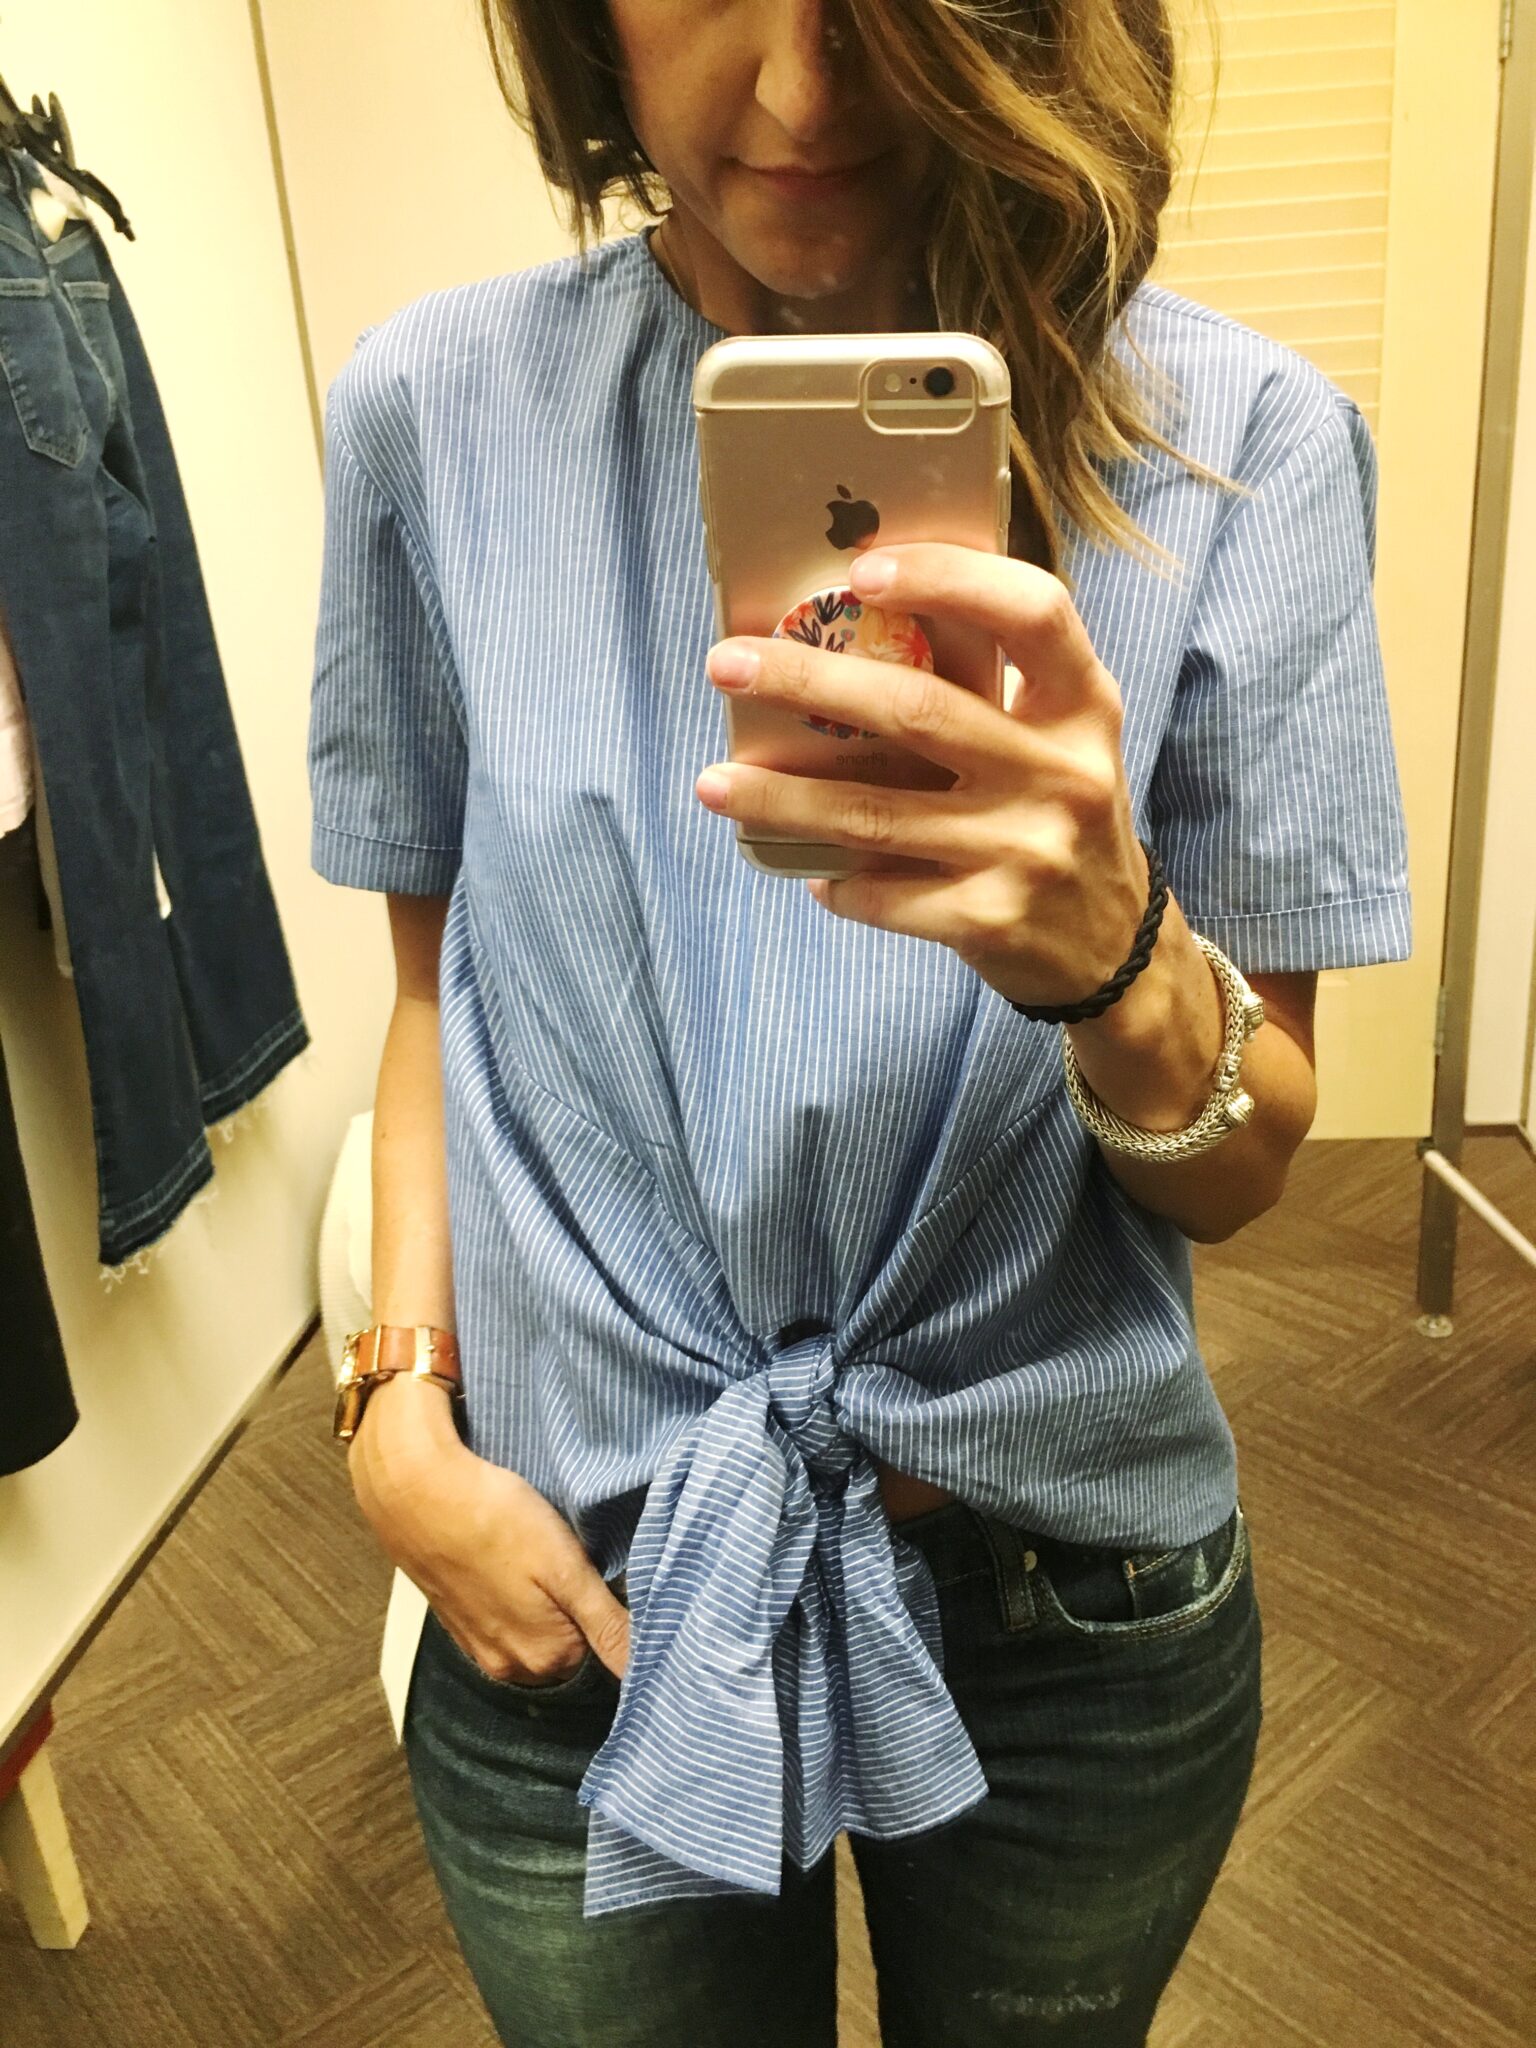 Tie Front Top - Nordstrom Anniversary Sale Try On Session by popular Washington DC style blogger Cobalt Chronicles